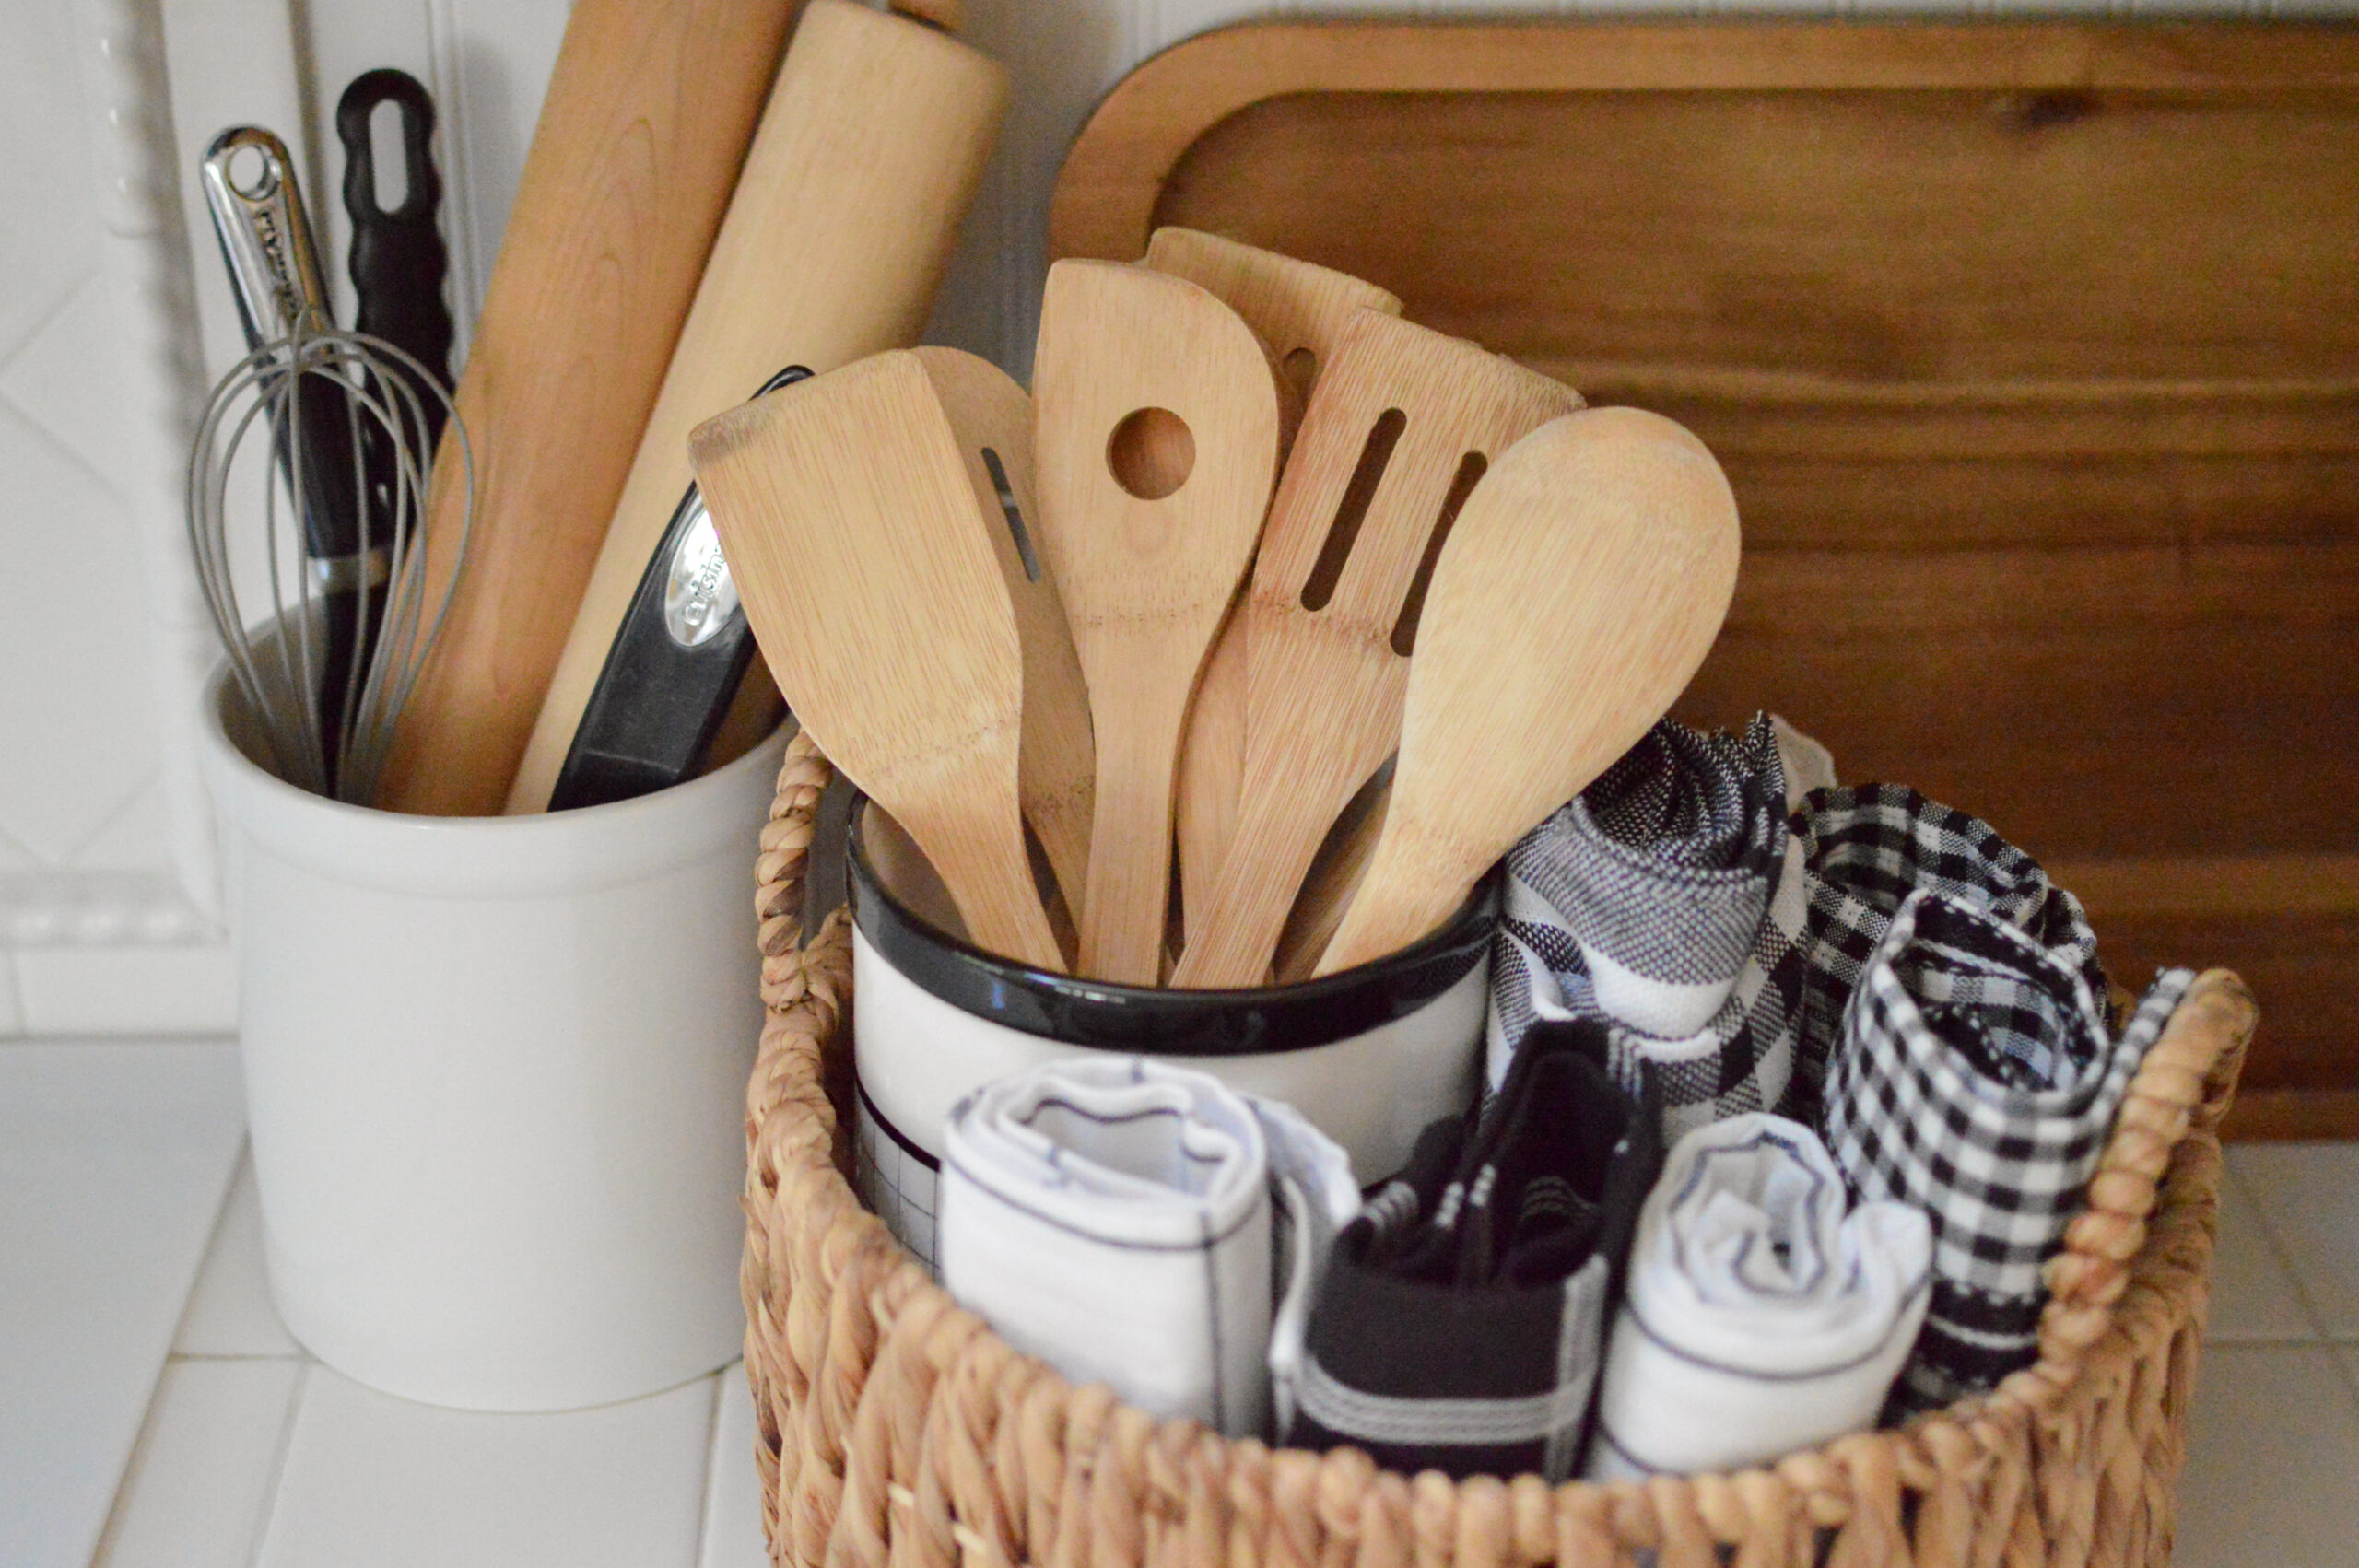 How To Organize Your Kitchen Utensils - Fox Hollow Cottage